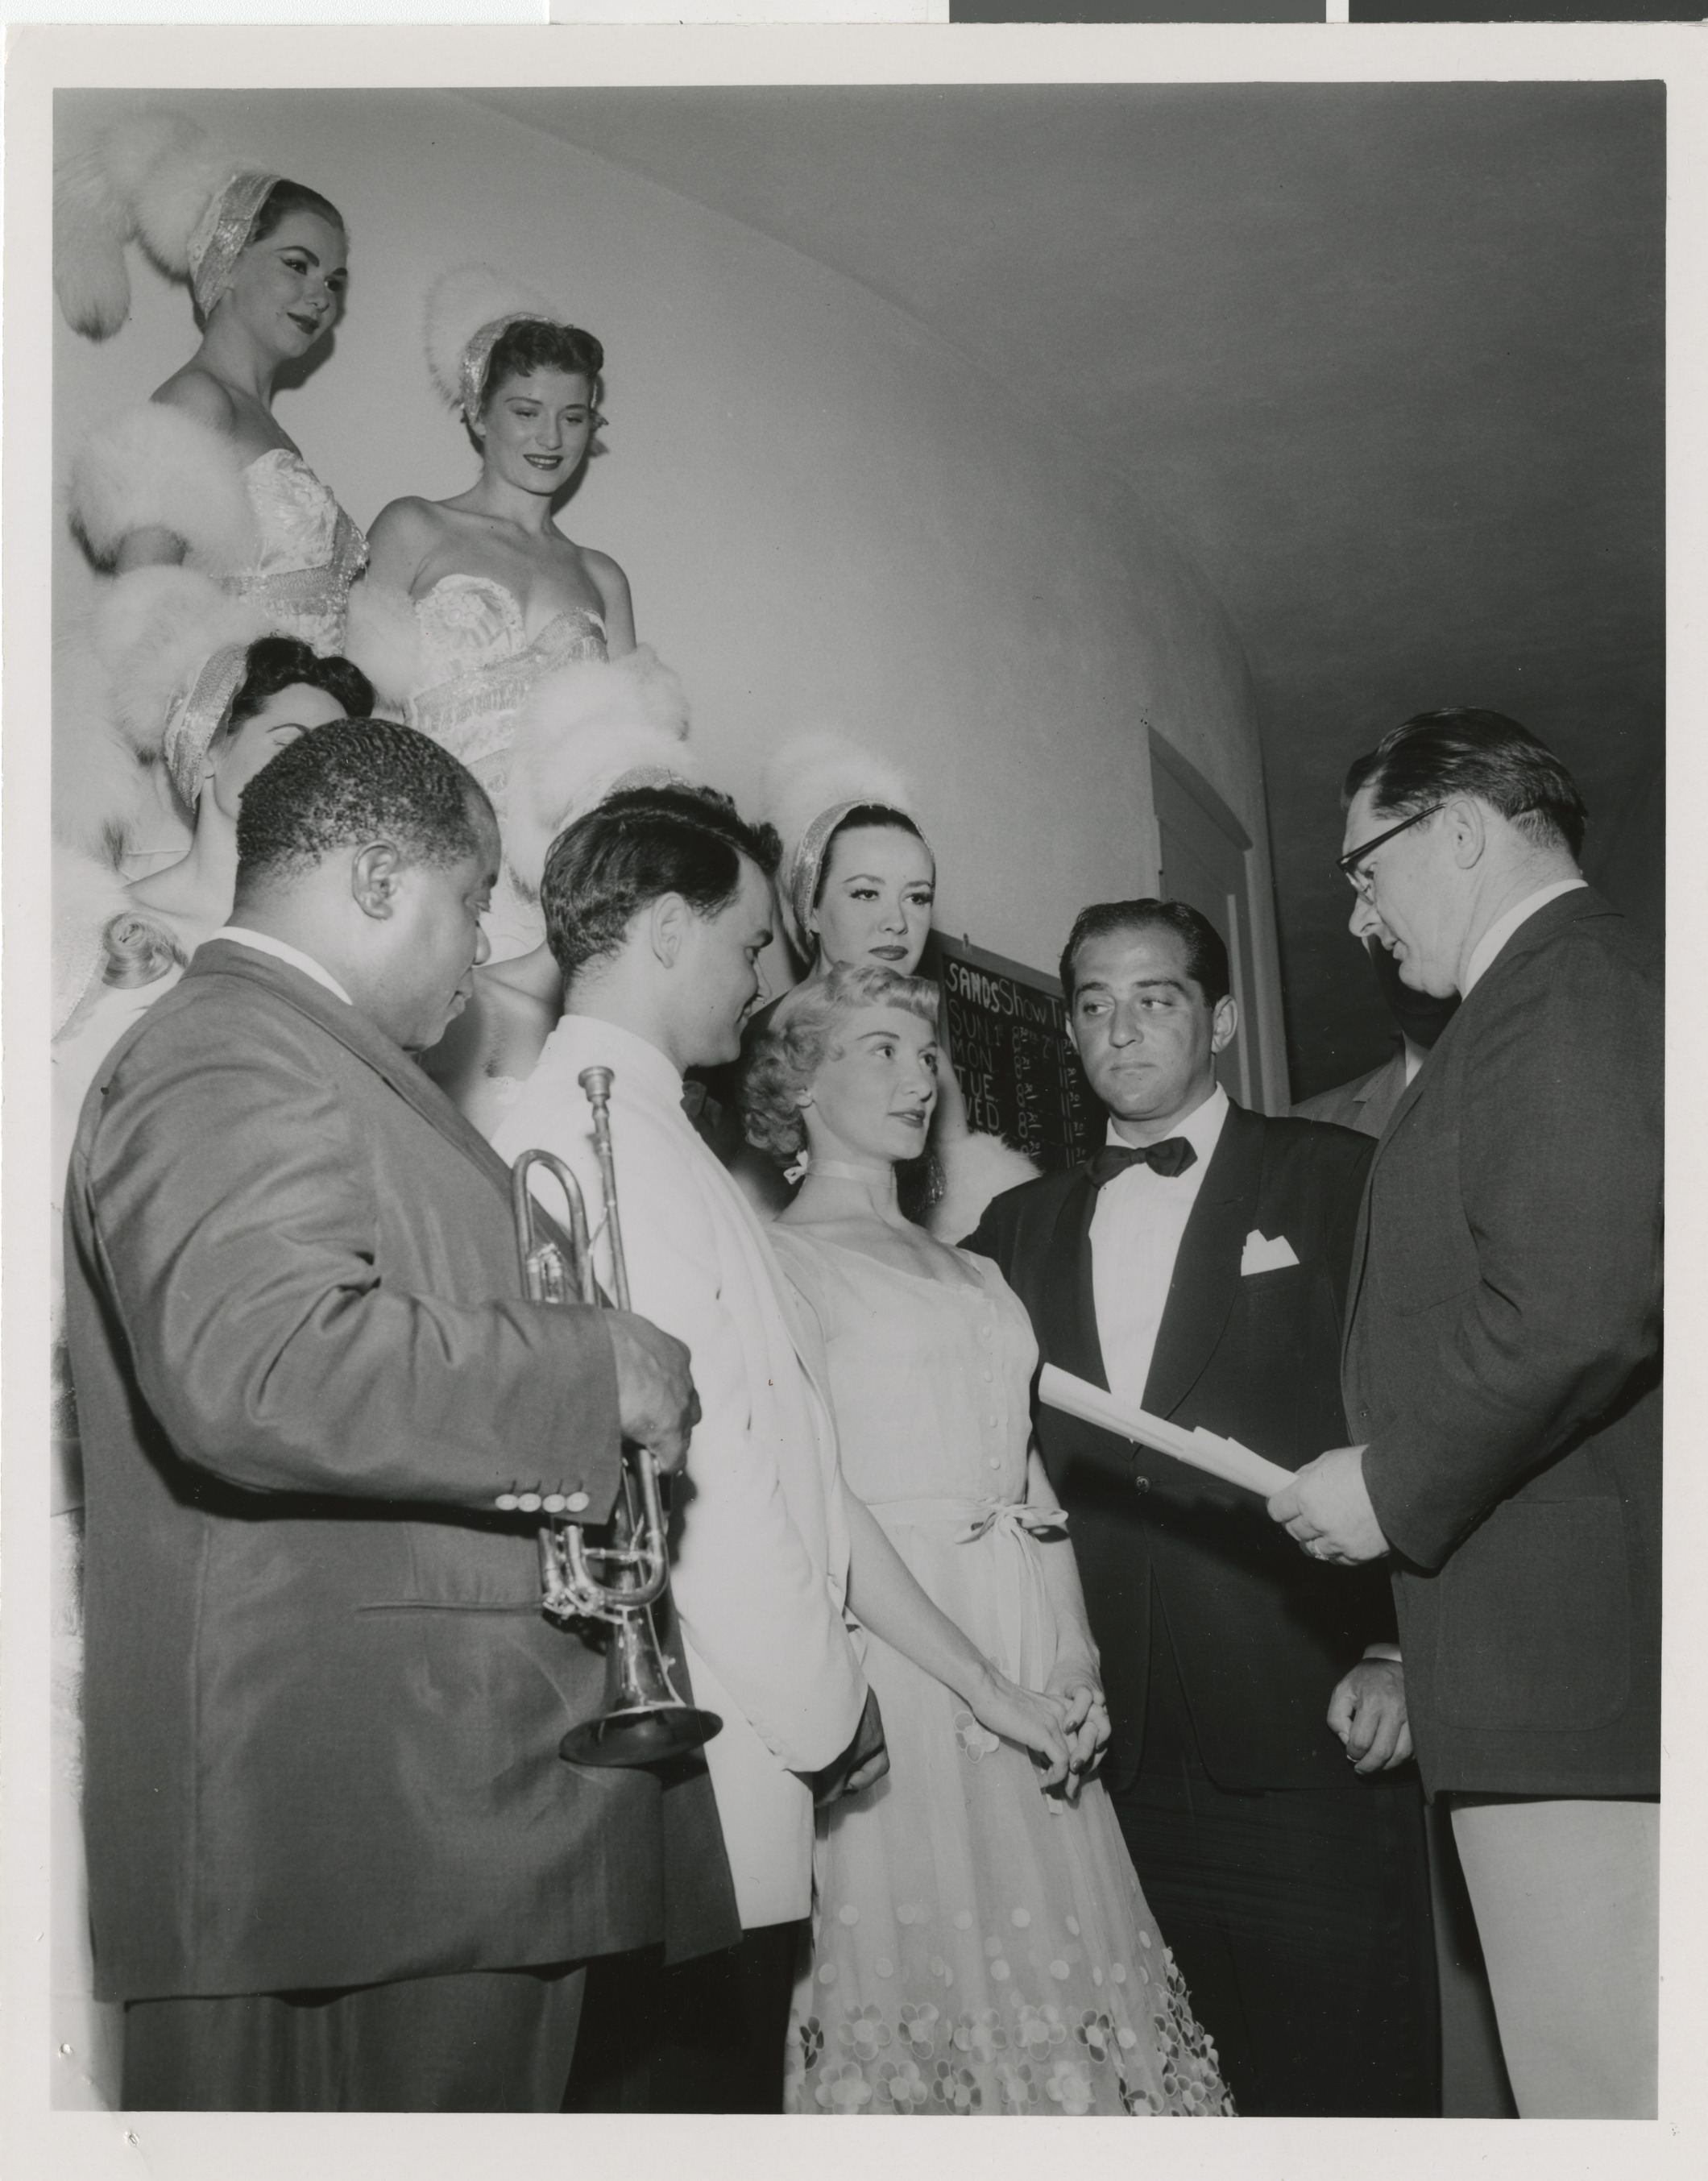 Photograph of Louis Armstrong off stage at a wedding ceremony